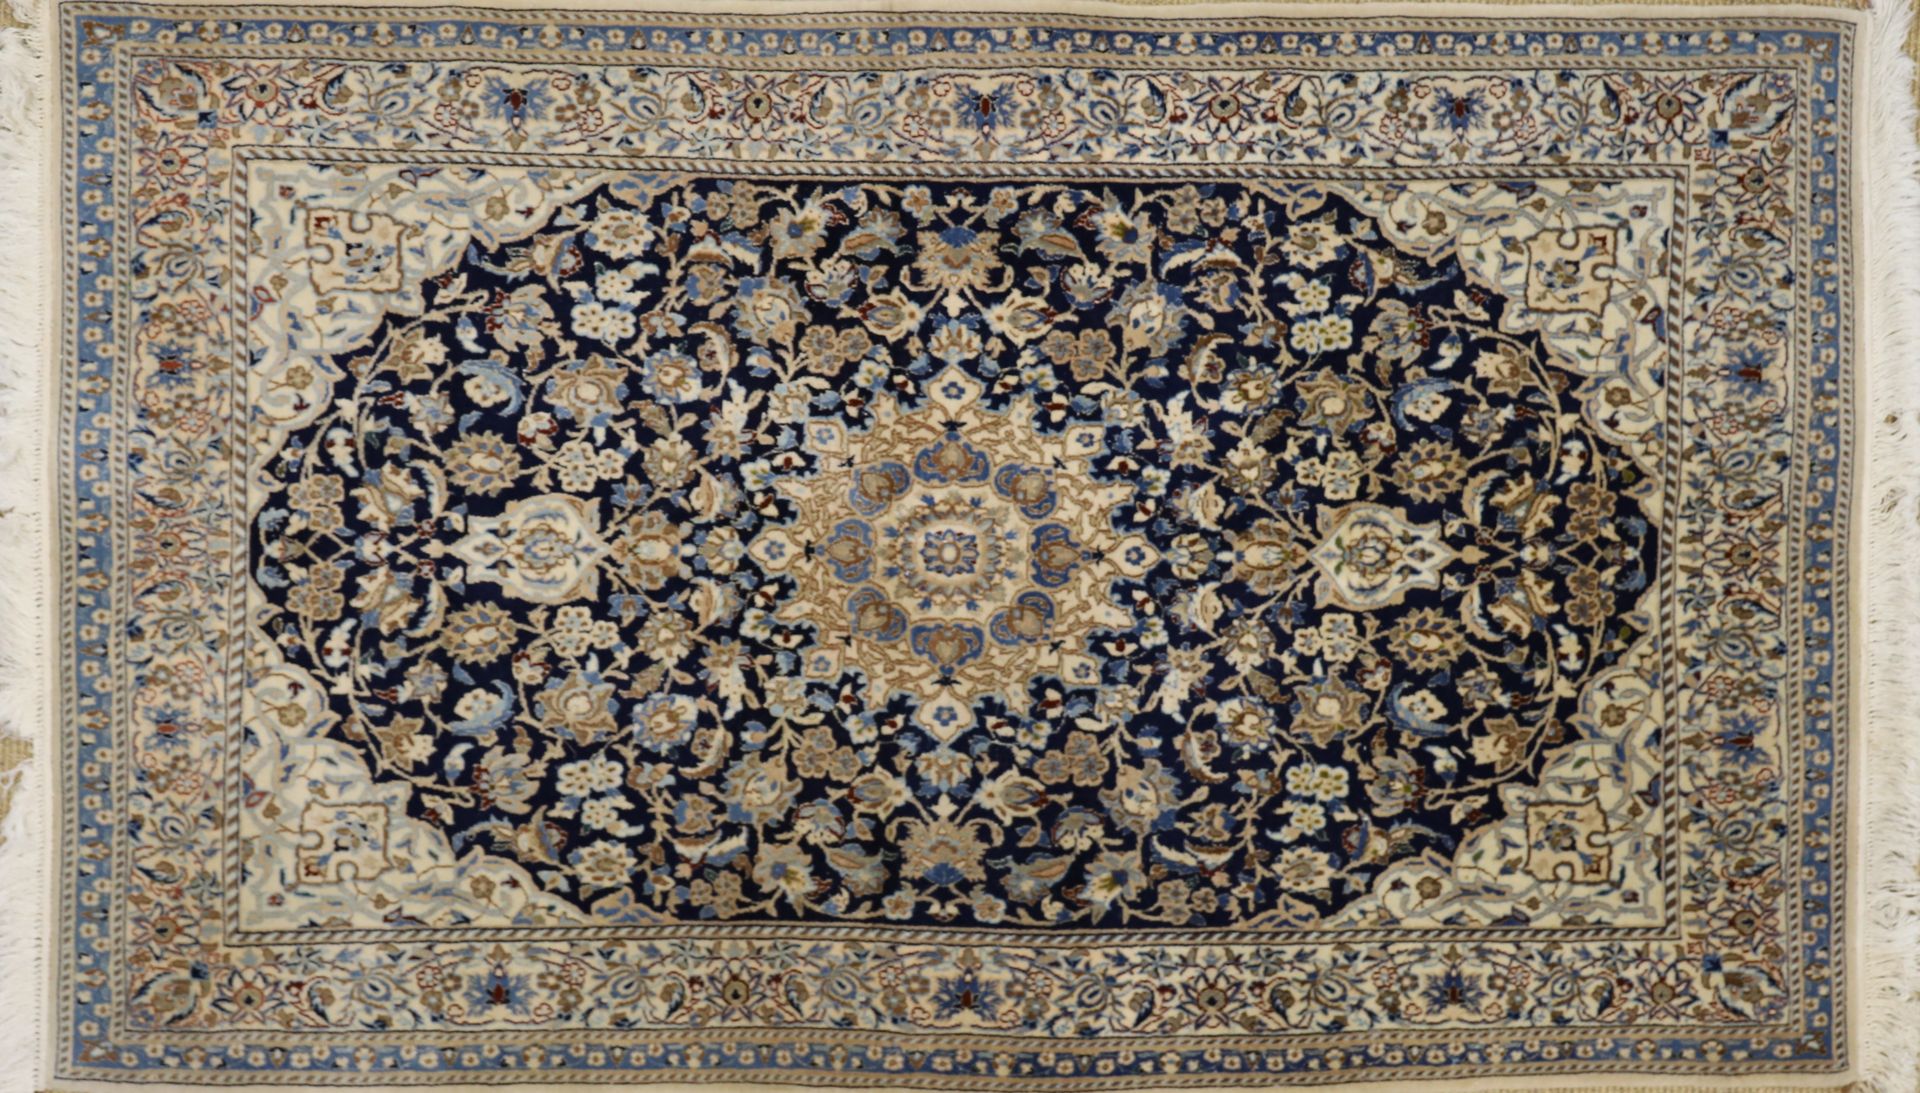 Null NAIM CARPET WITH BLUE BACKGROUND
Decorated with stylized plant motifs
Hand-&hellip;